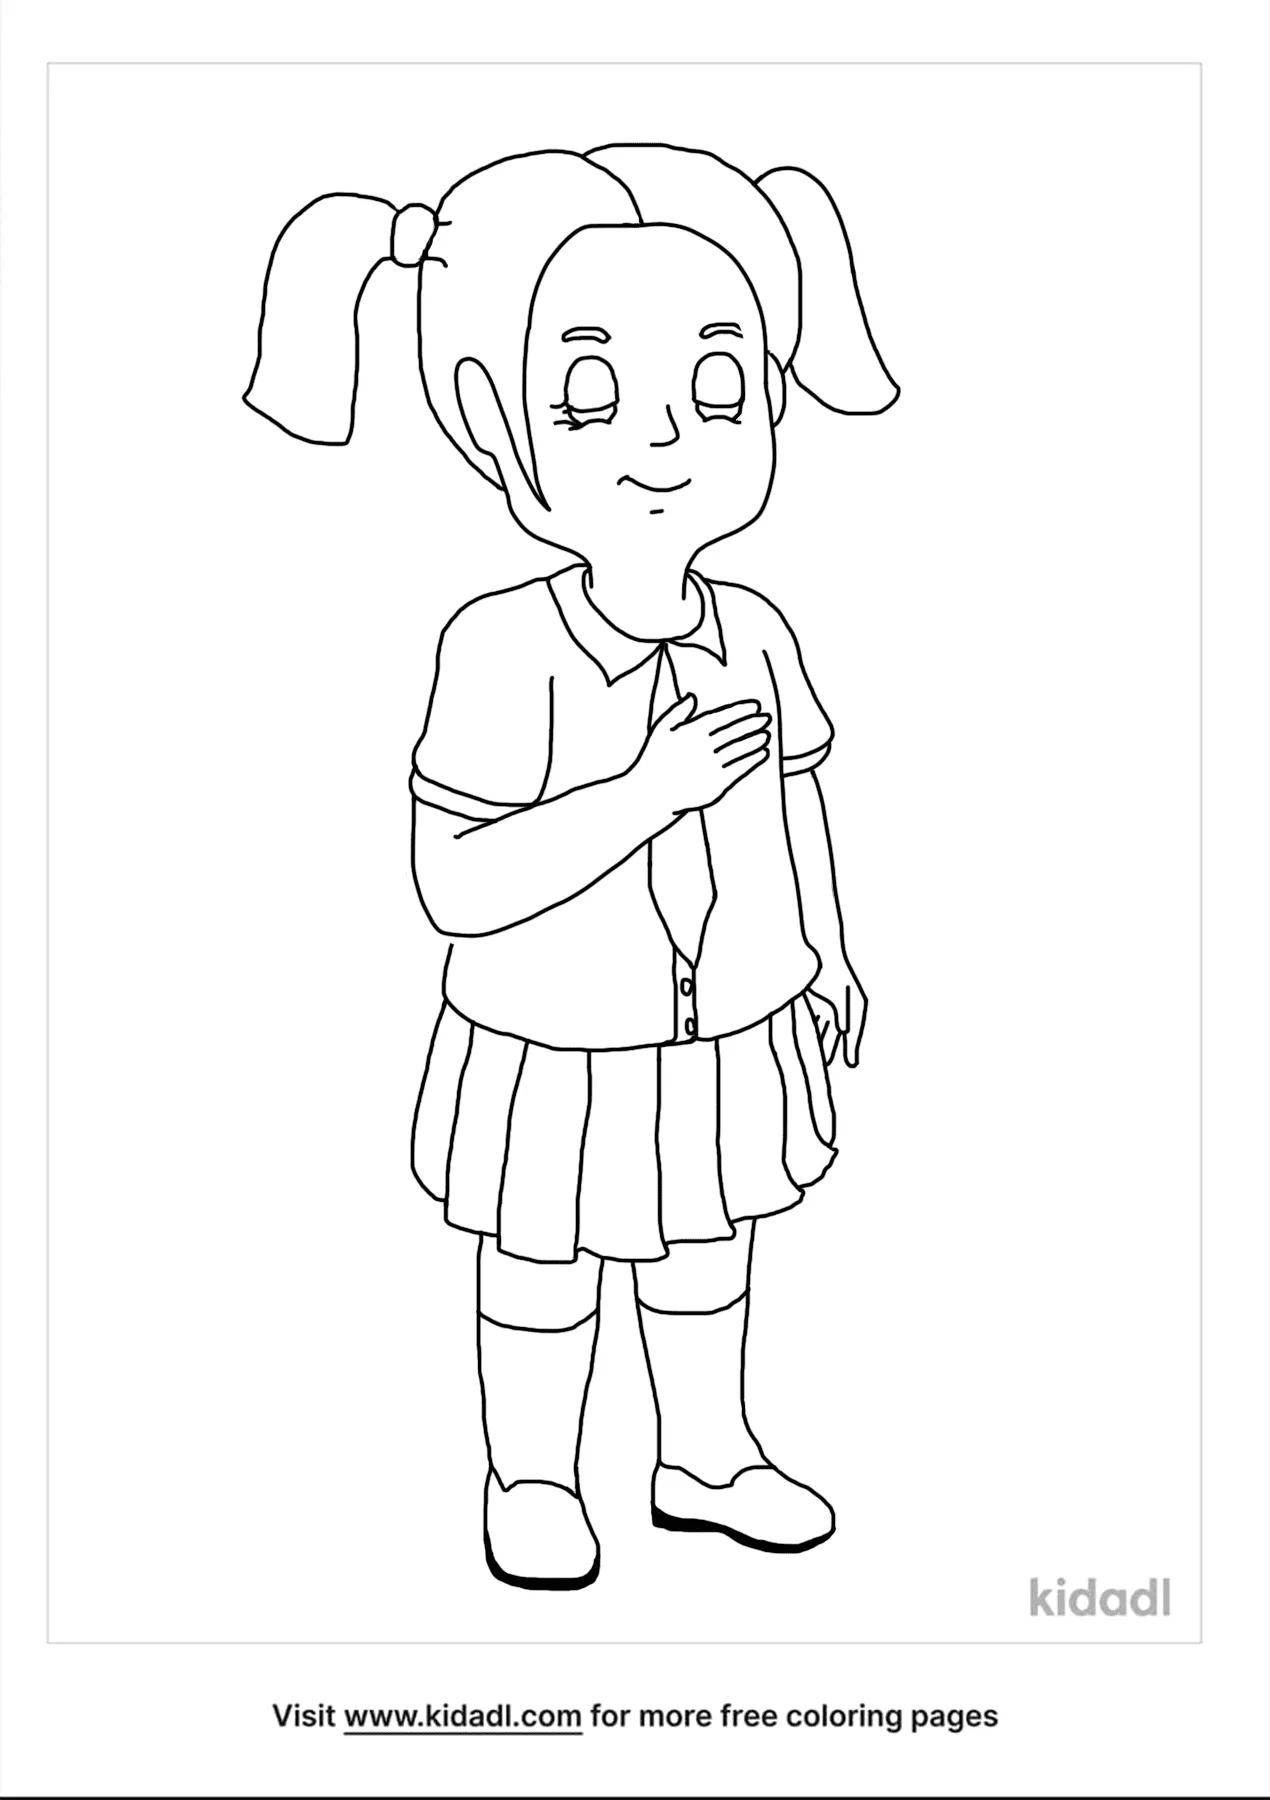 Free pledge of allegiance coloring page coloring page printables